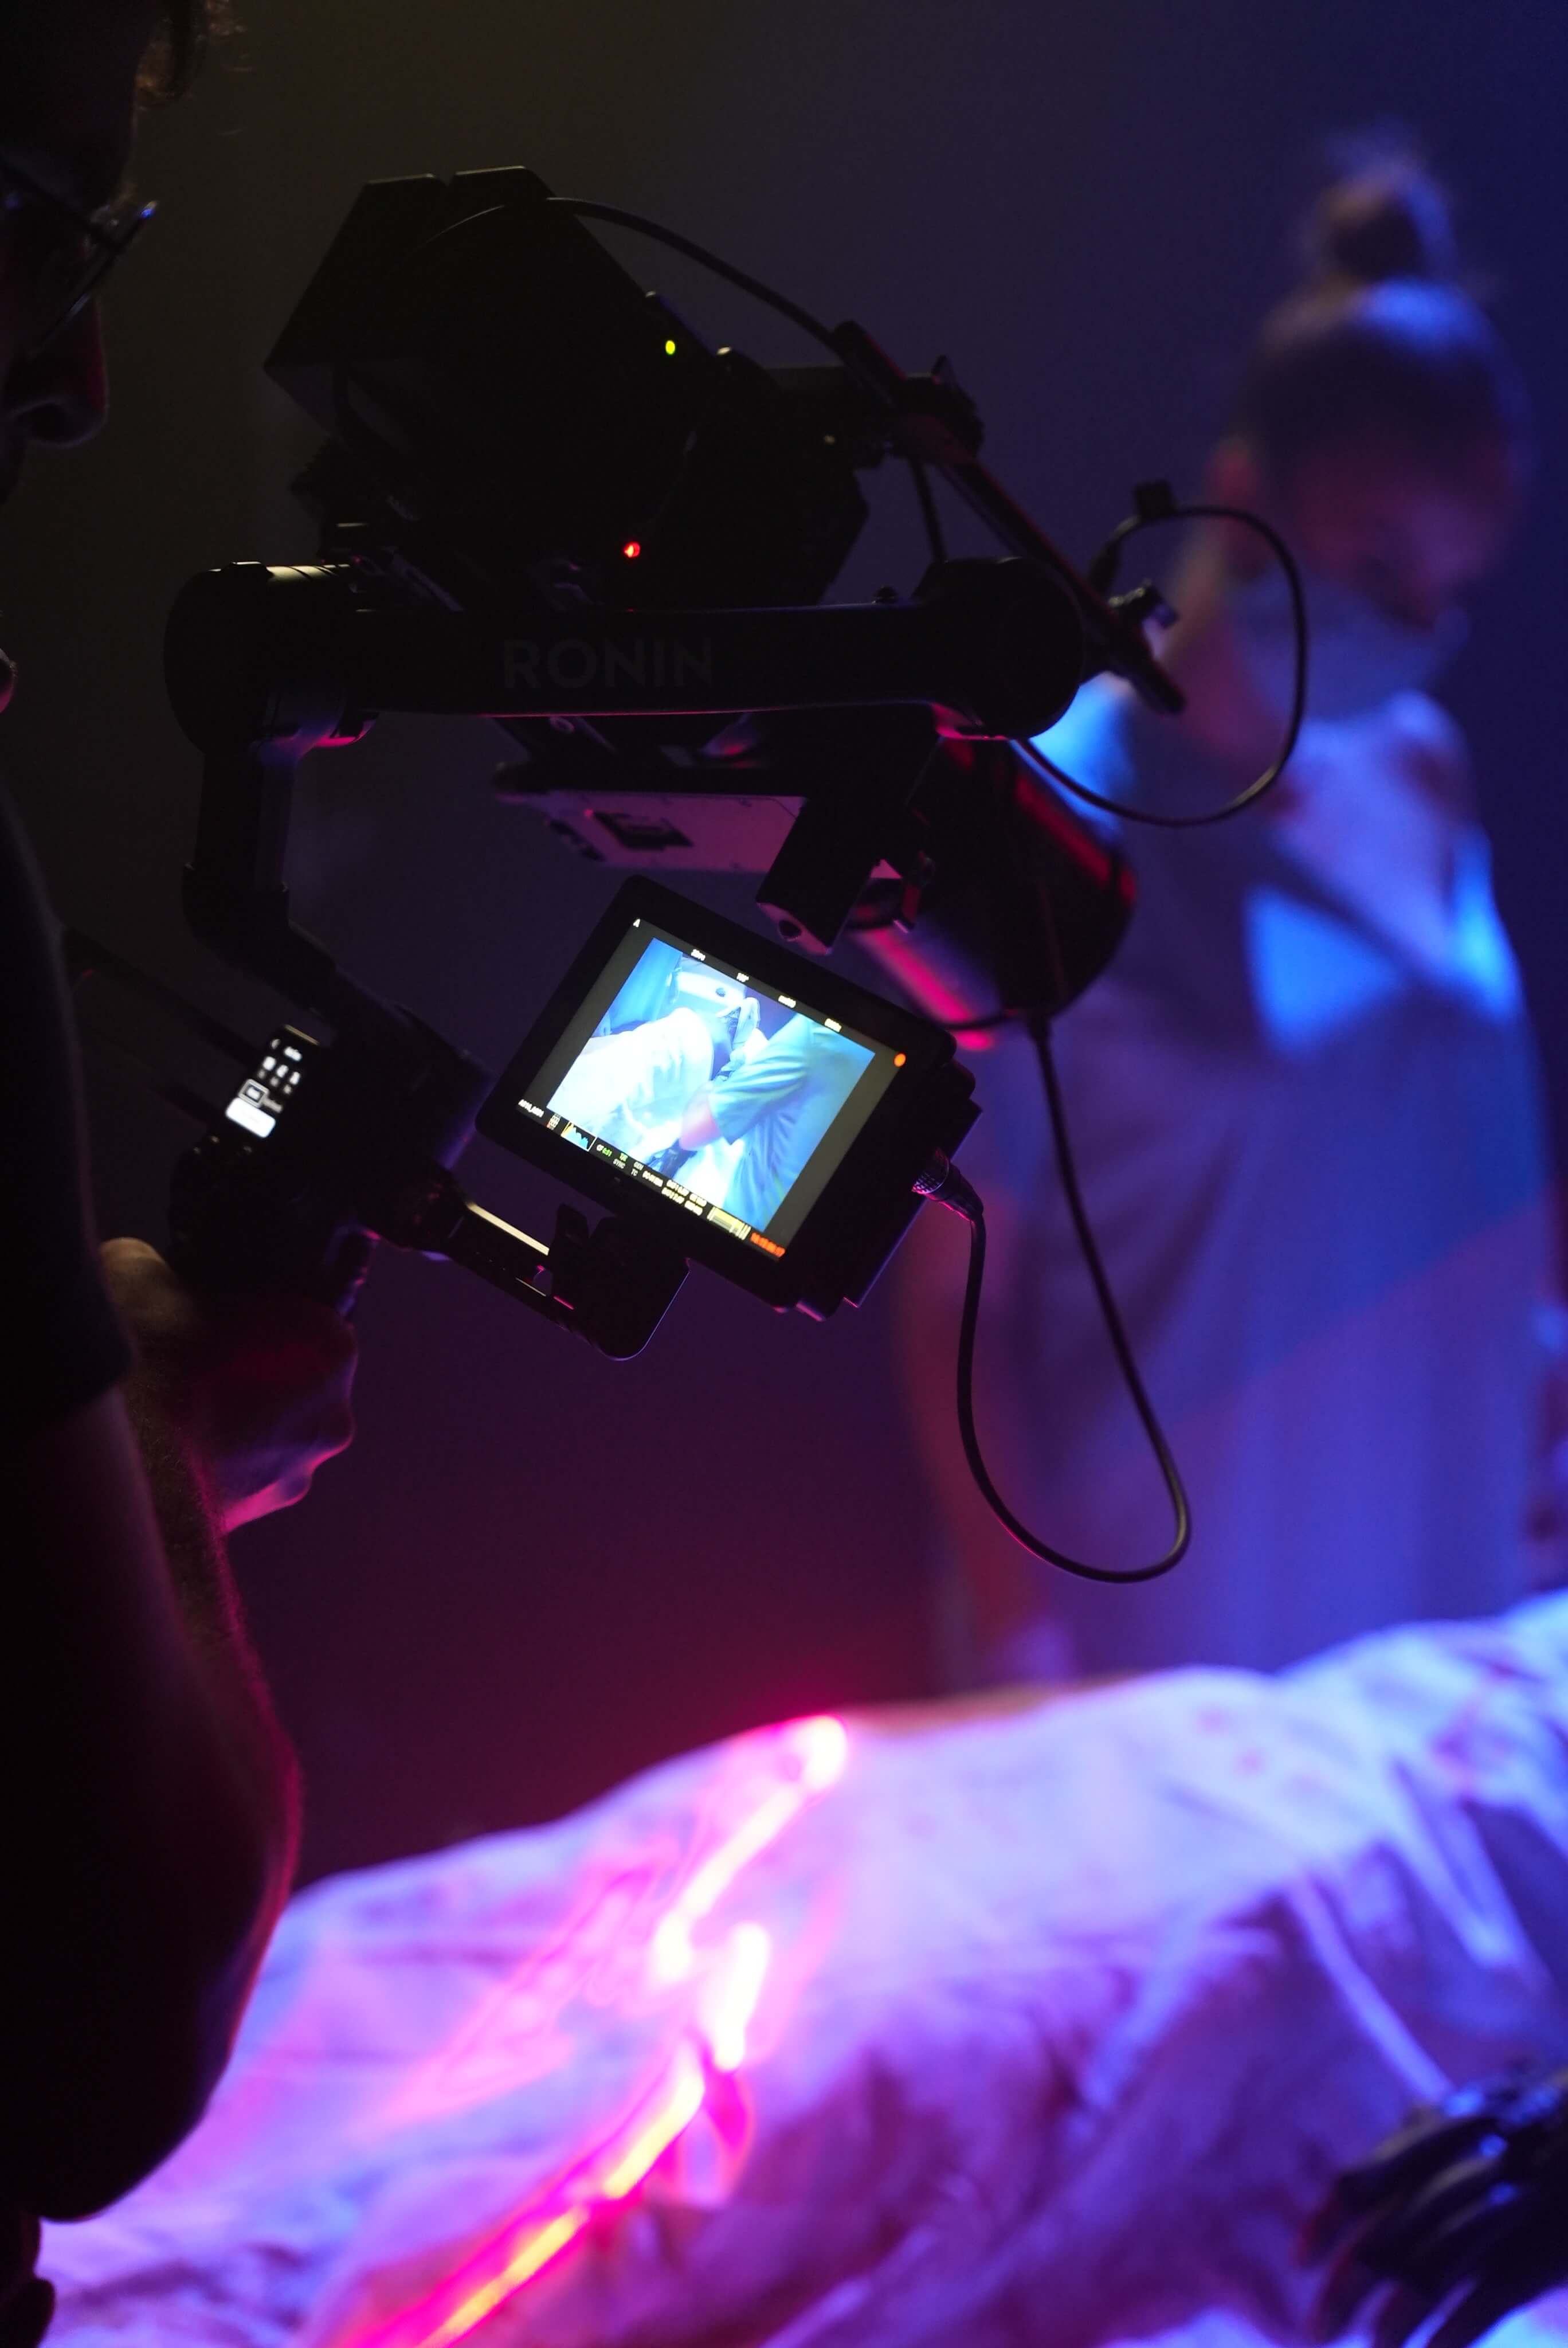 A music video shooting with sci fi lighting, the videographer holding a DJ Rs3 pro stabilzer with a Red Komodo 6k paird with DZOFILM 20-55mm T2.8 Pictor Zoom on the top, a nurse visible in the background and some white sheet.